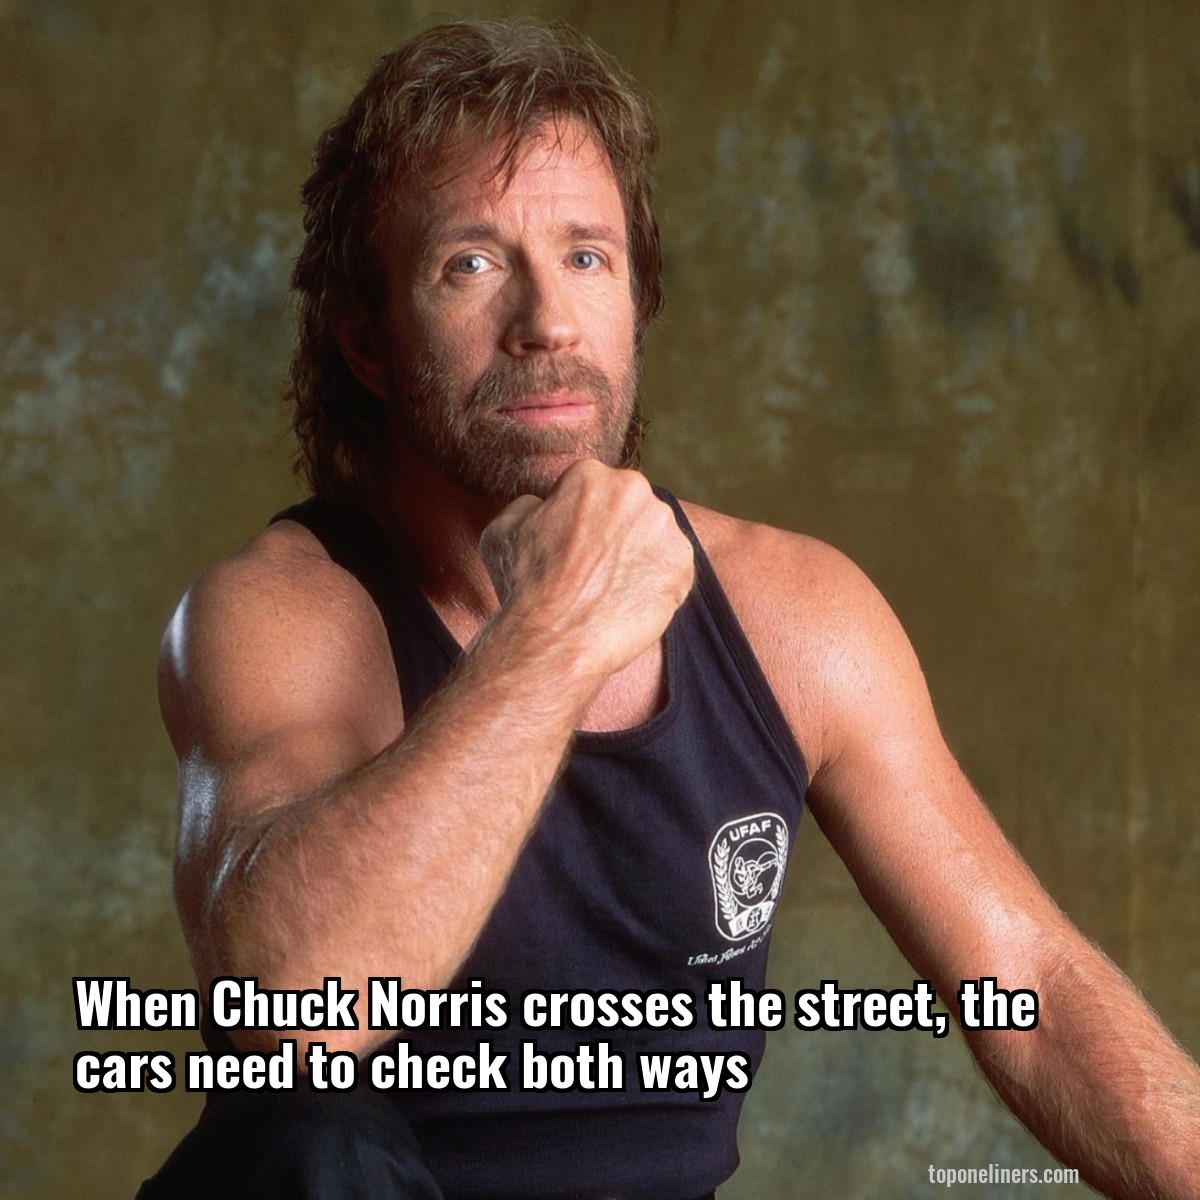 When Chuck Norris crosses the street, the cars need to check both ways